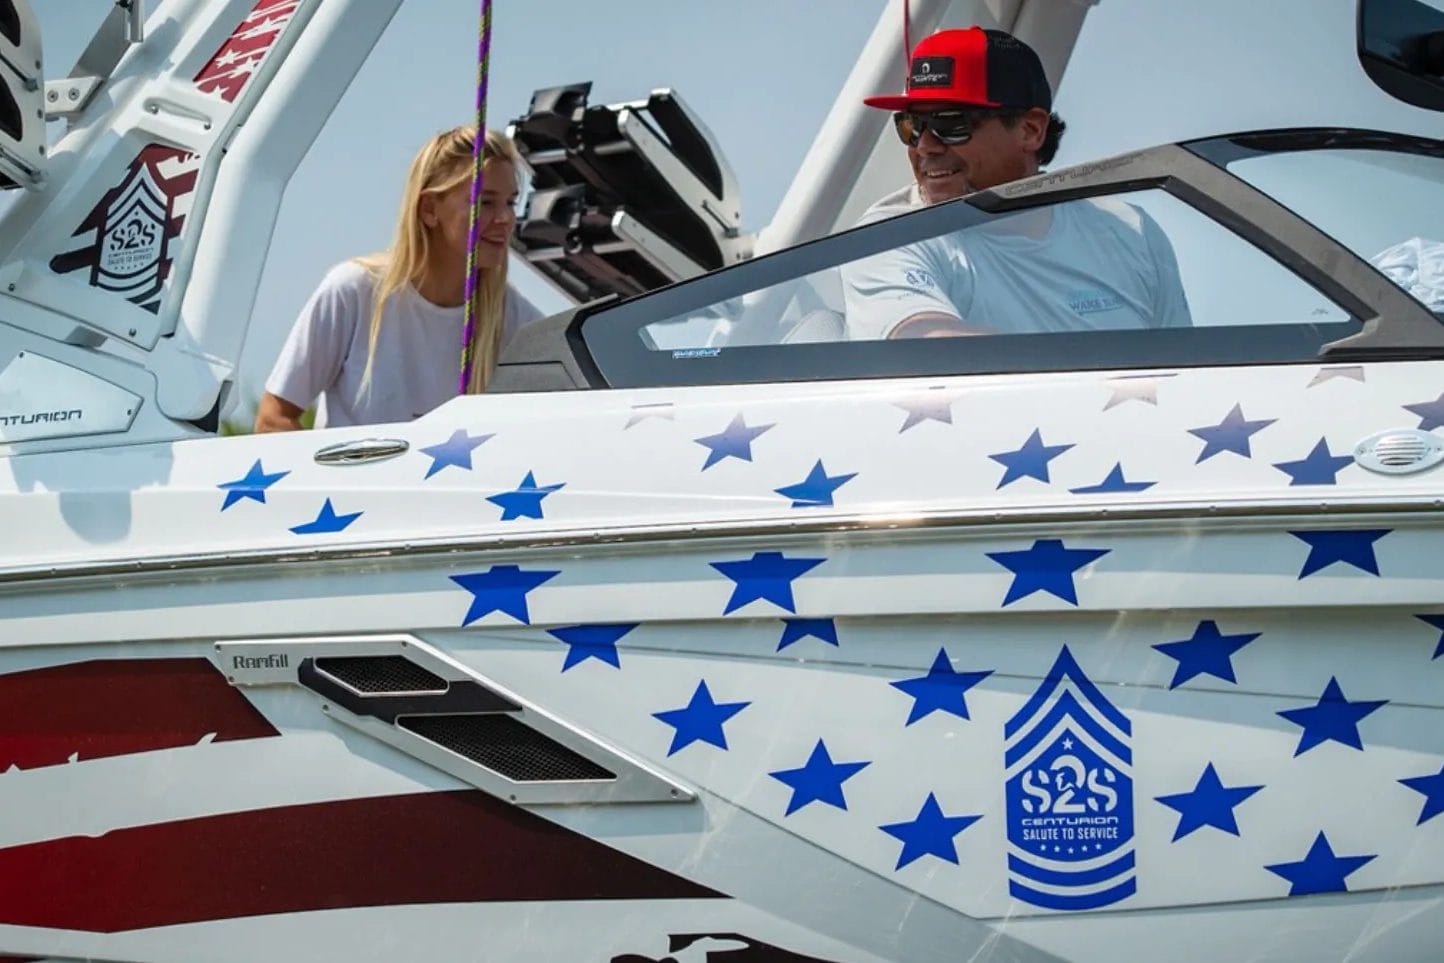 A man and woman on a wakesurf boat with an American flag on it.